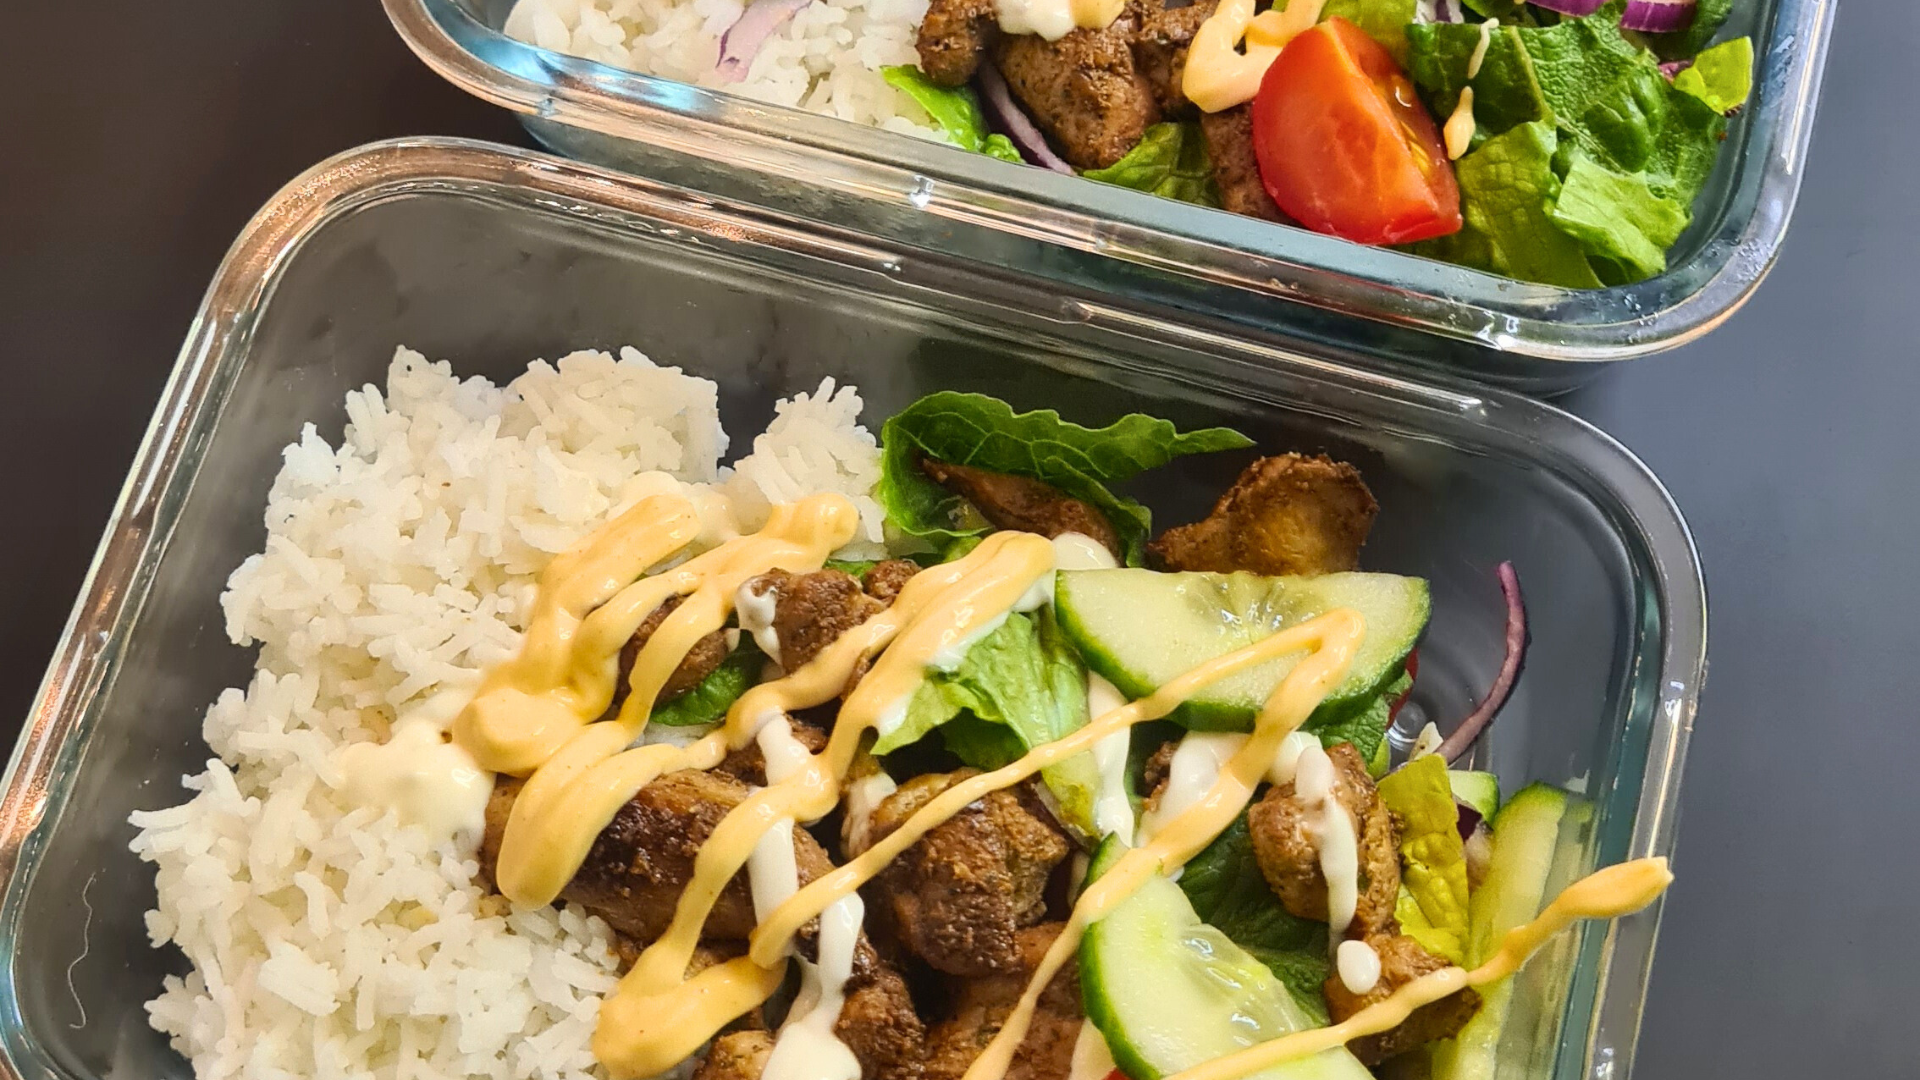 Enjoy this amazing greek chicken and rice meal prep recipe.